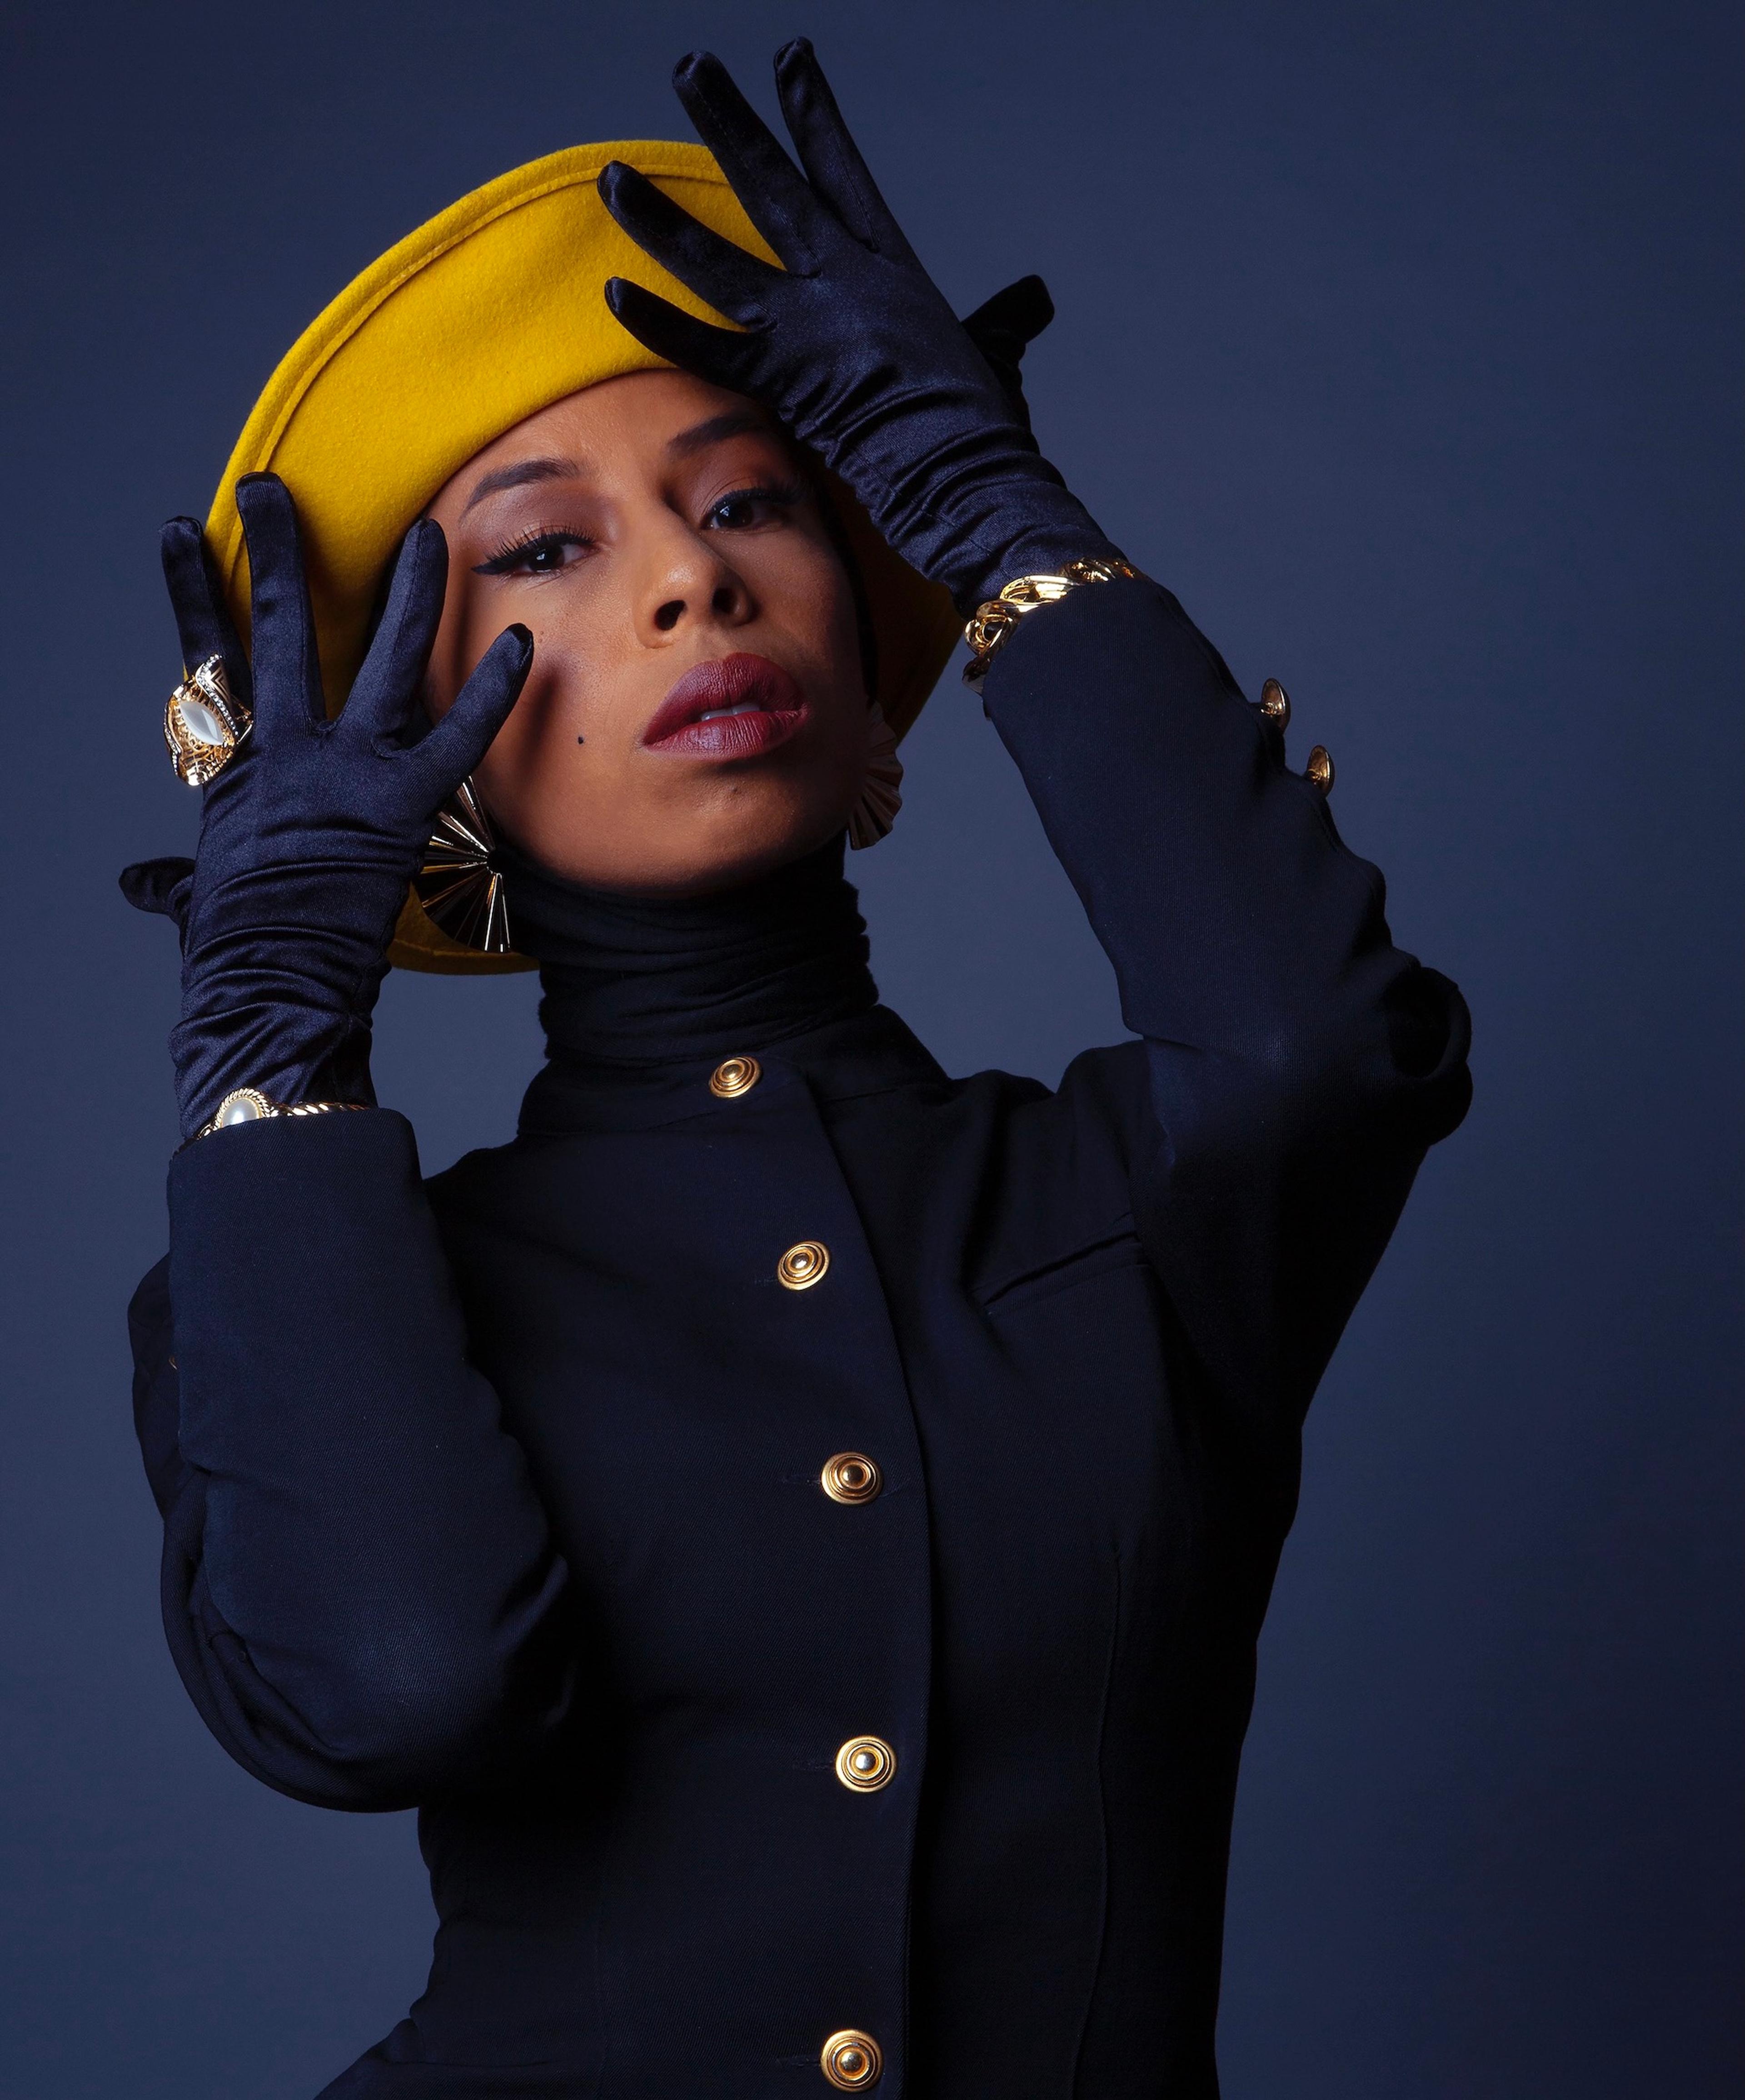 A portrait of a woman wearing a suit, gloves, and yellow cap against a navy blue background